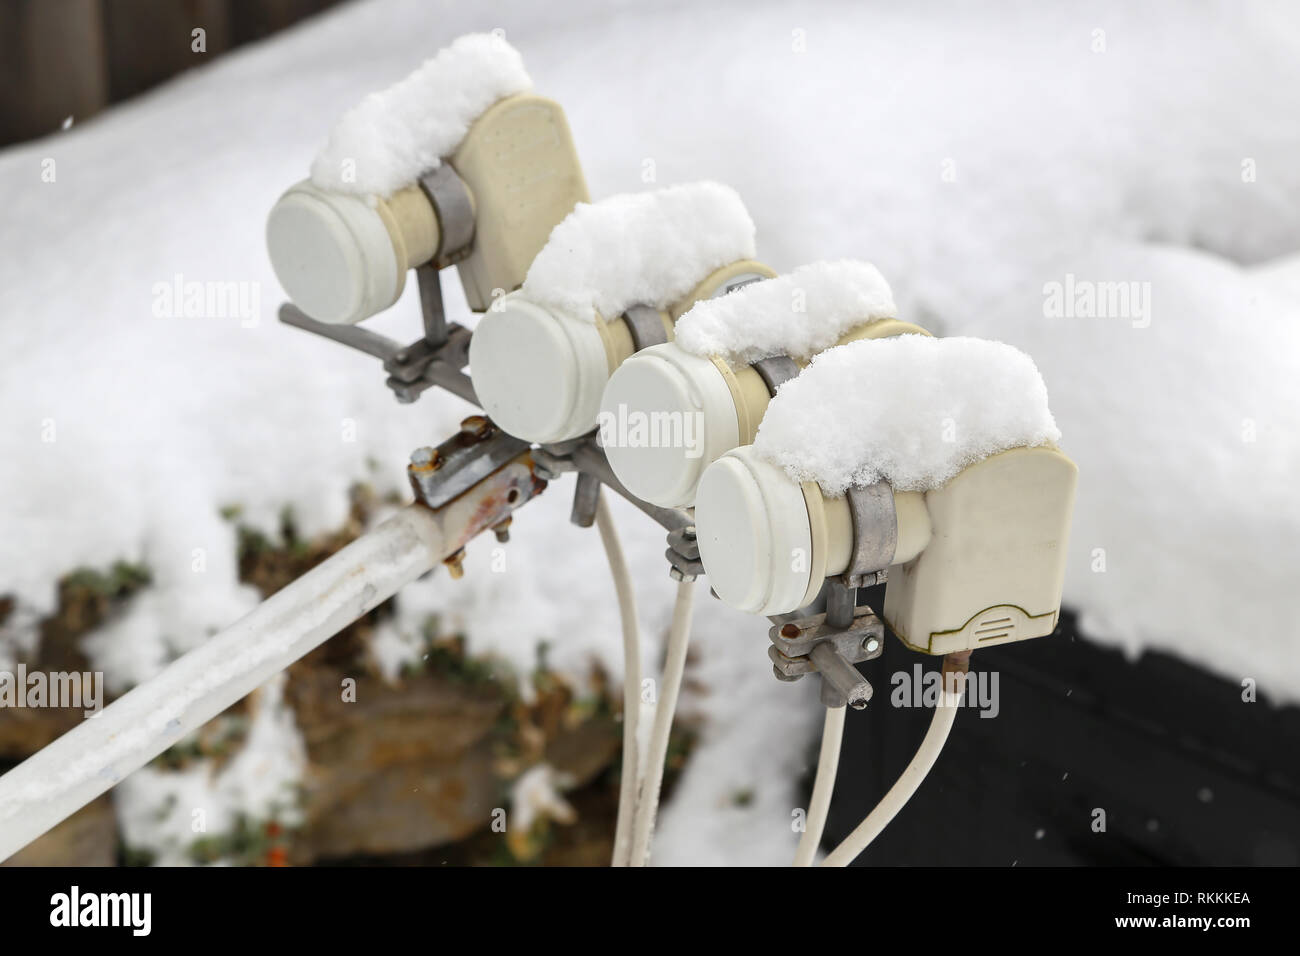 television / Satellite television / lnb in the snow Stock Photo